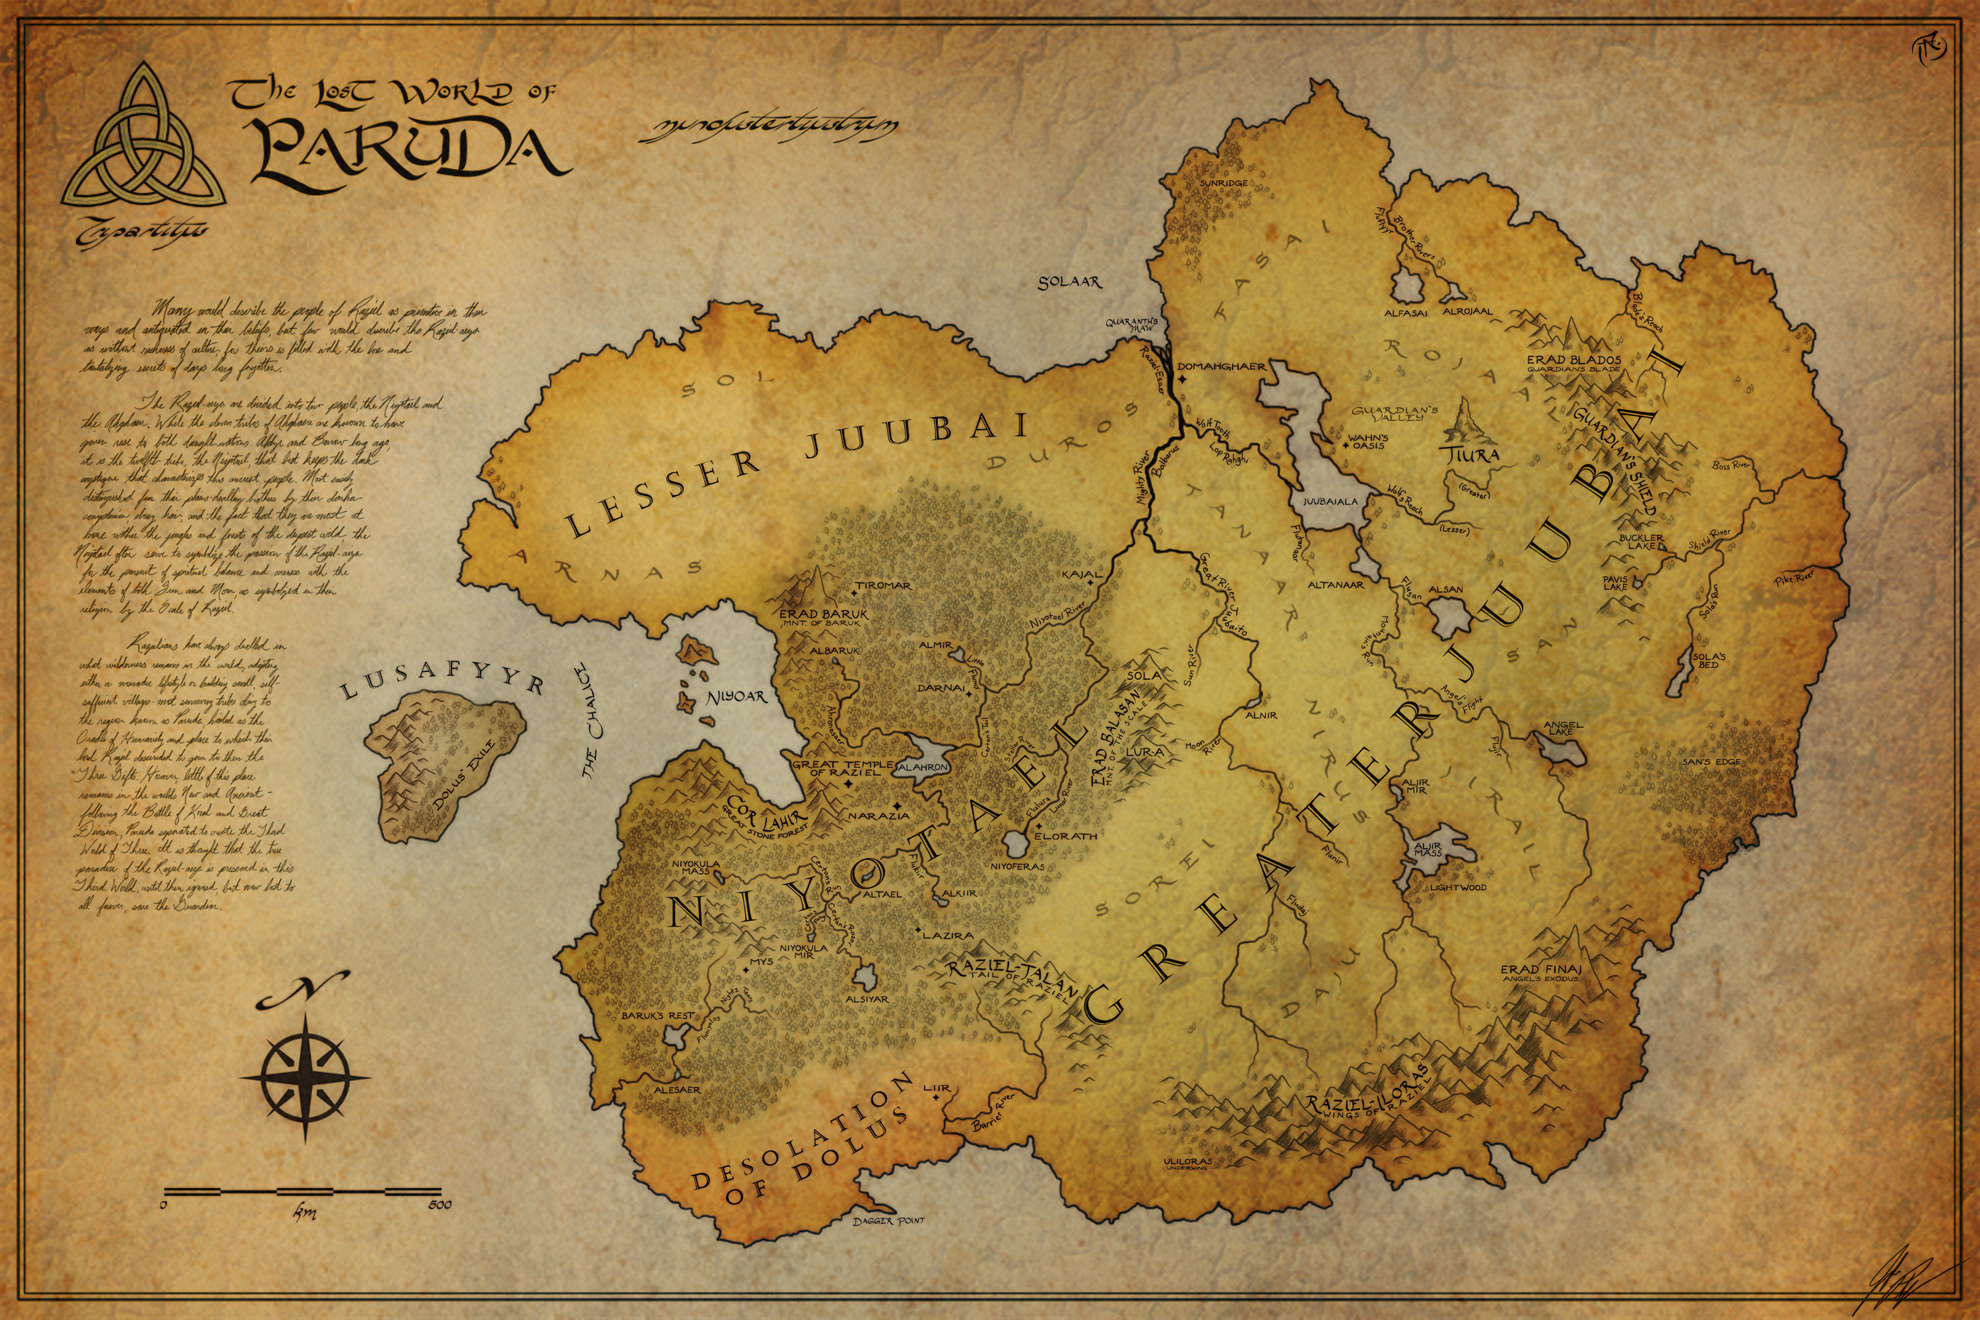 The Lost World of Paruda - Map